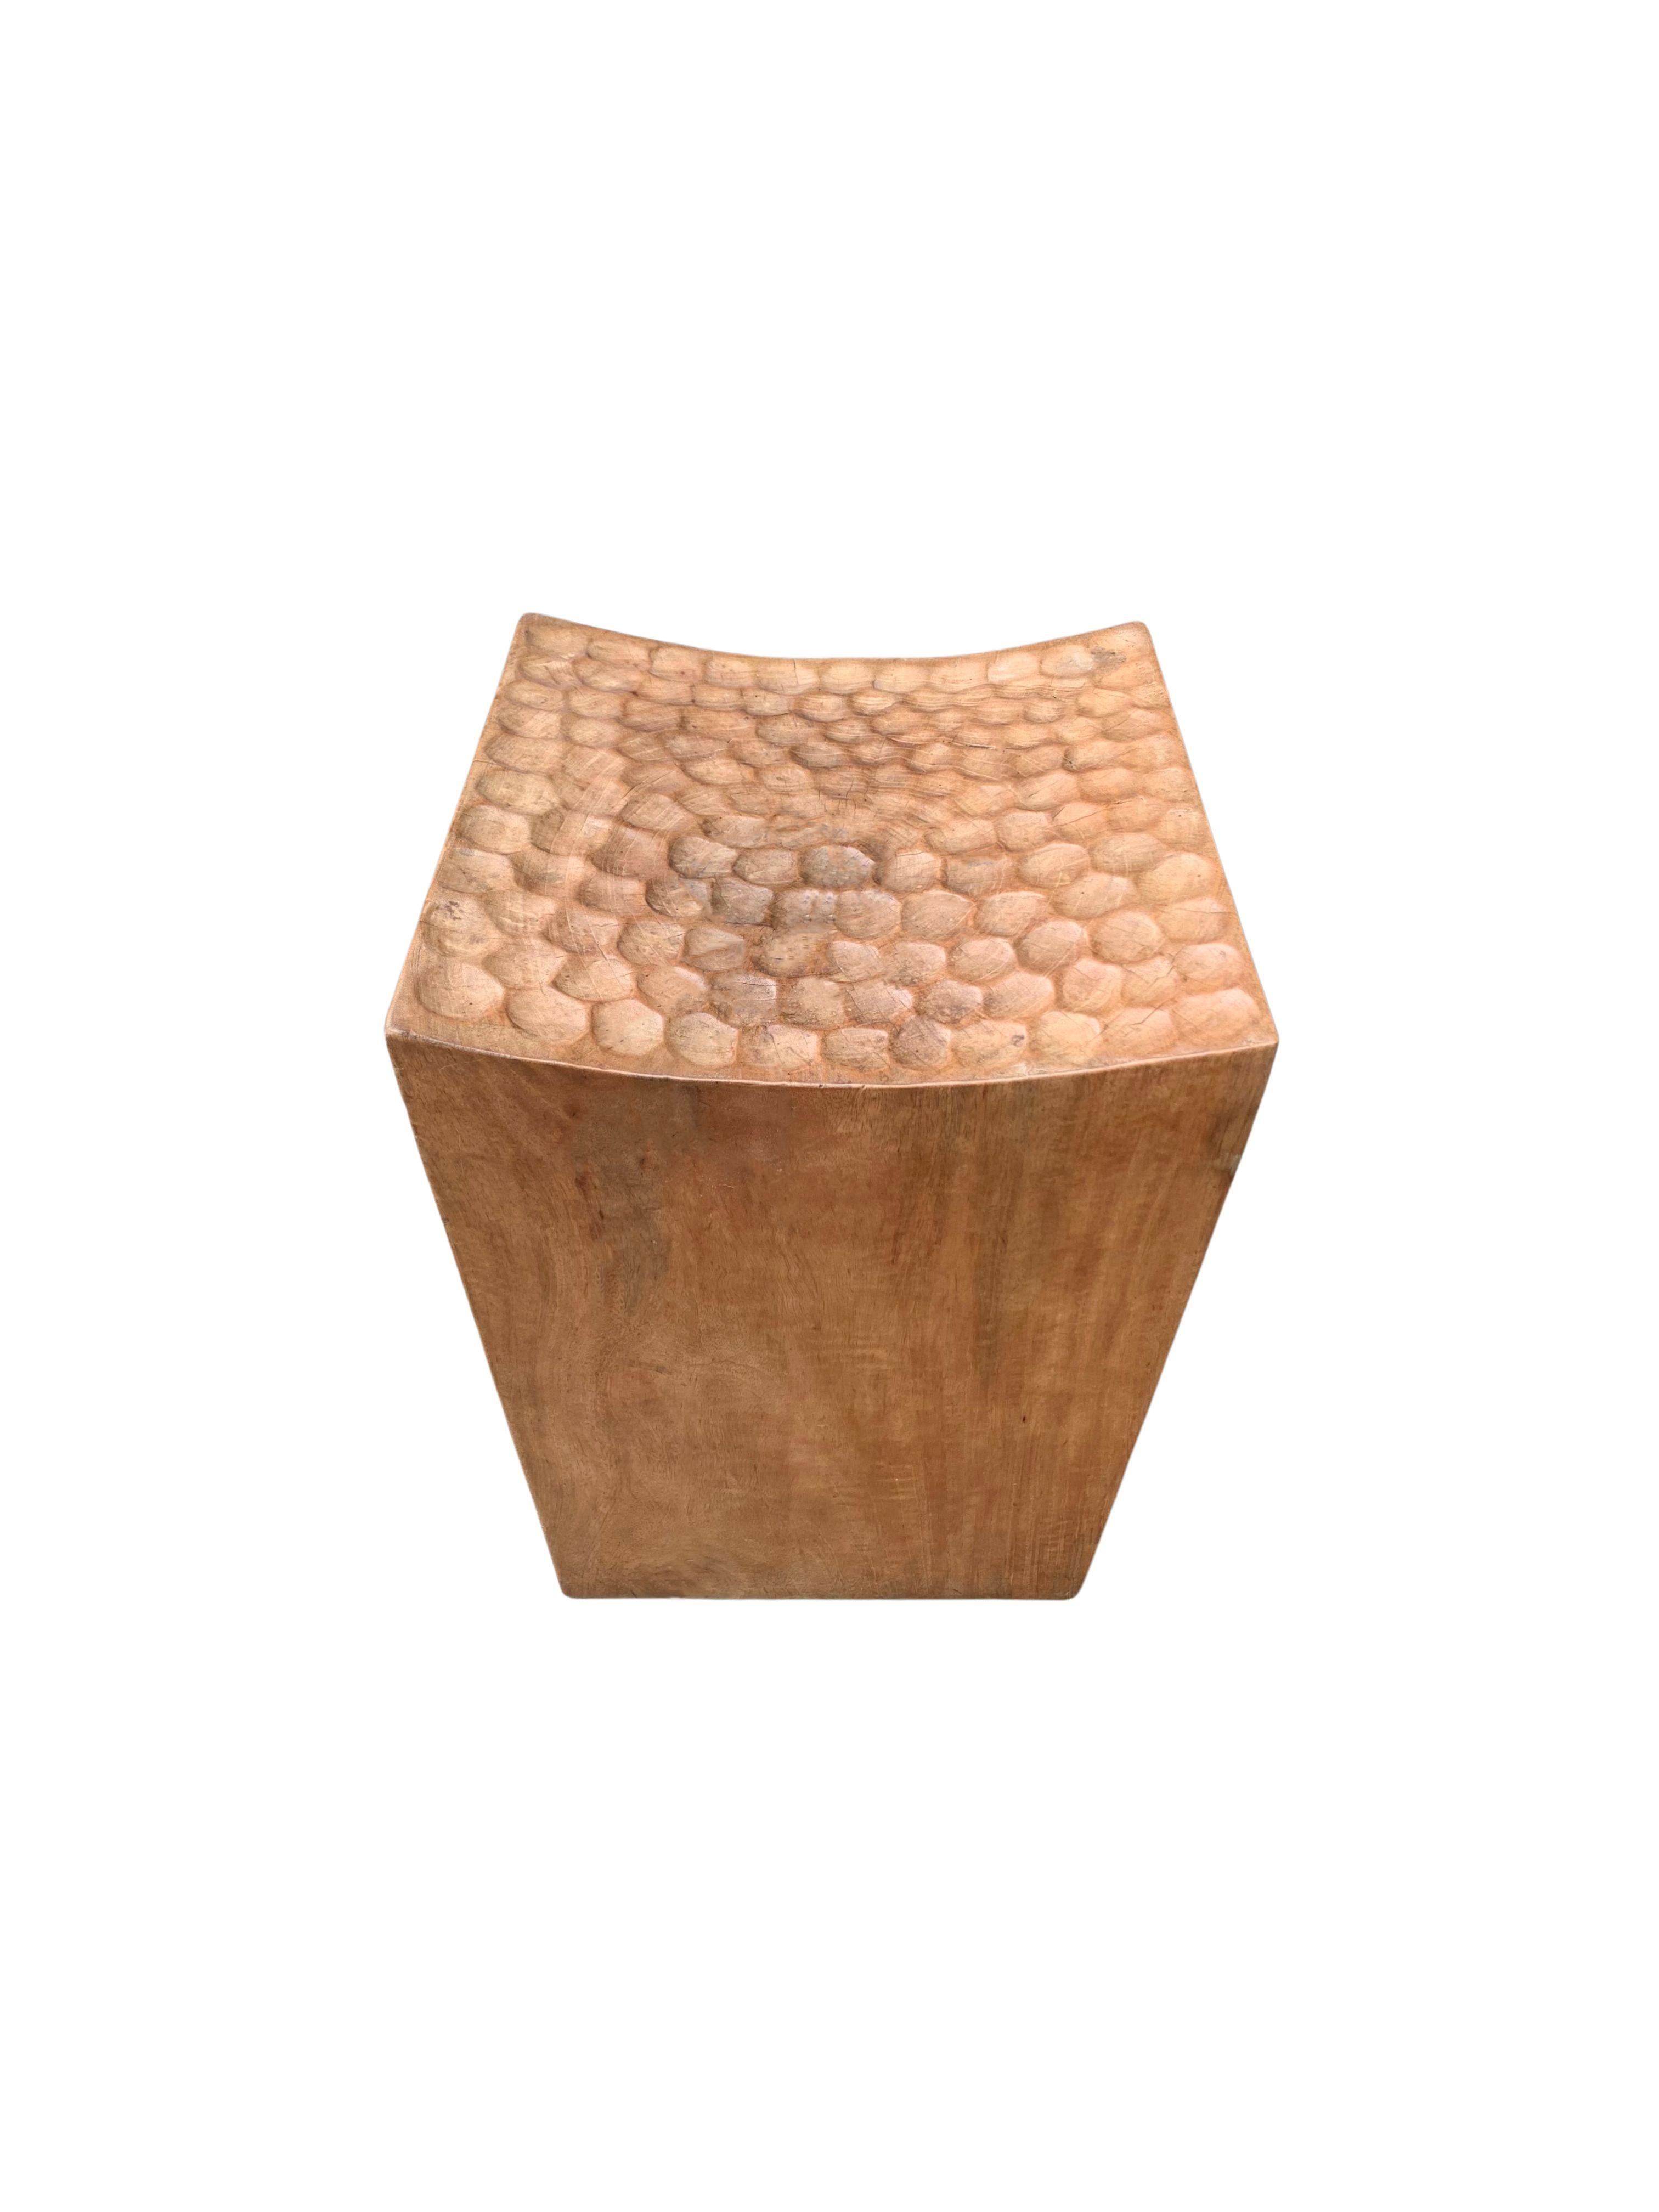 Contemporary Sculptural Stool Carved from Solid Mango Wood Modern Organic For Sale